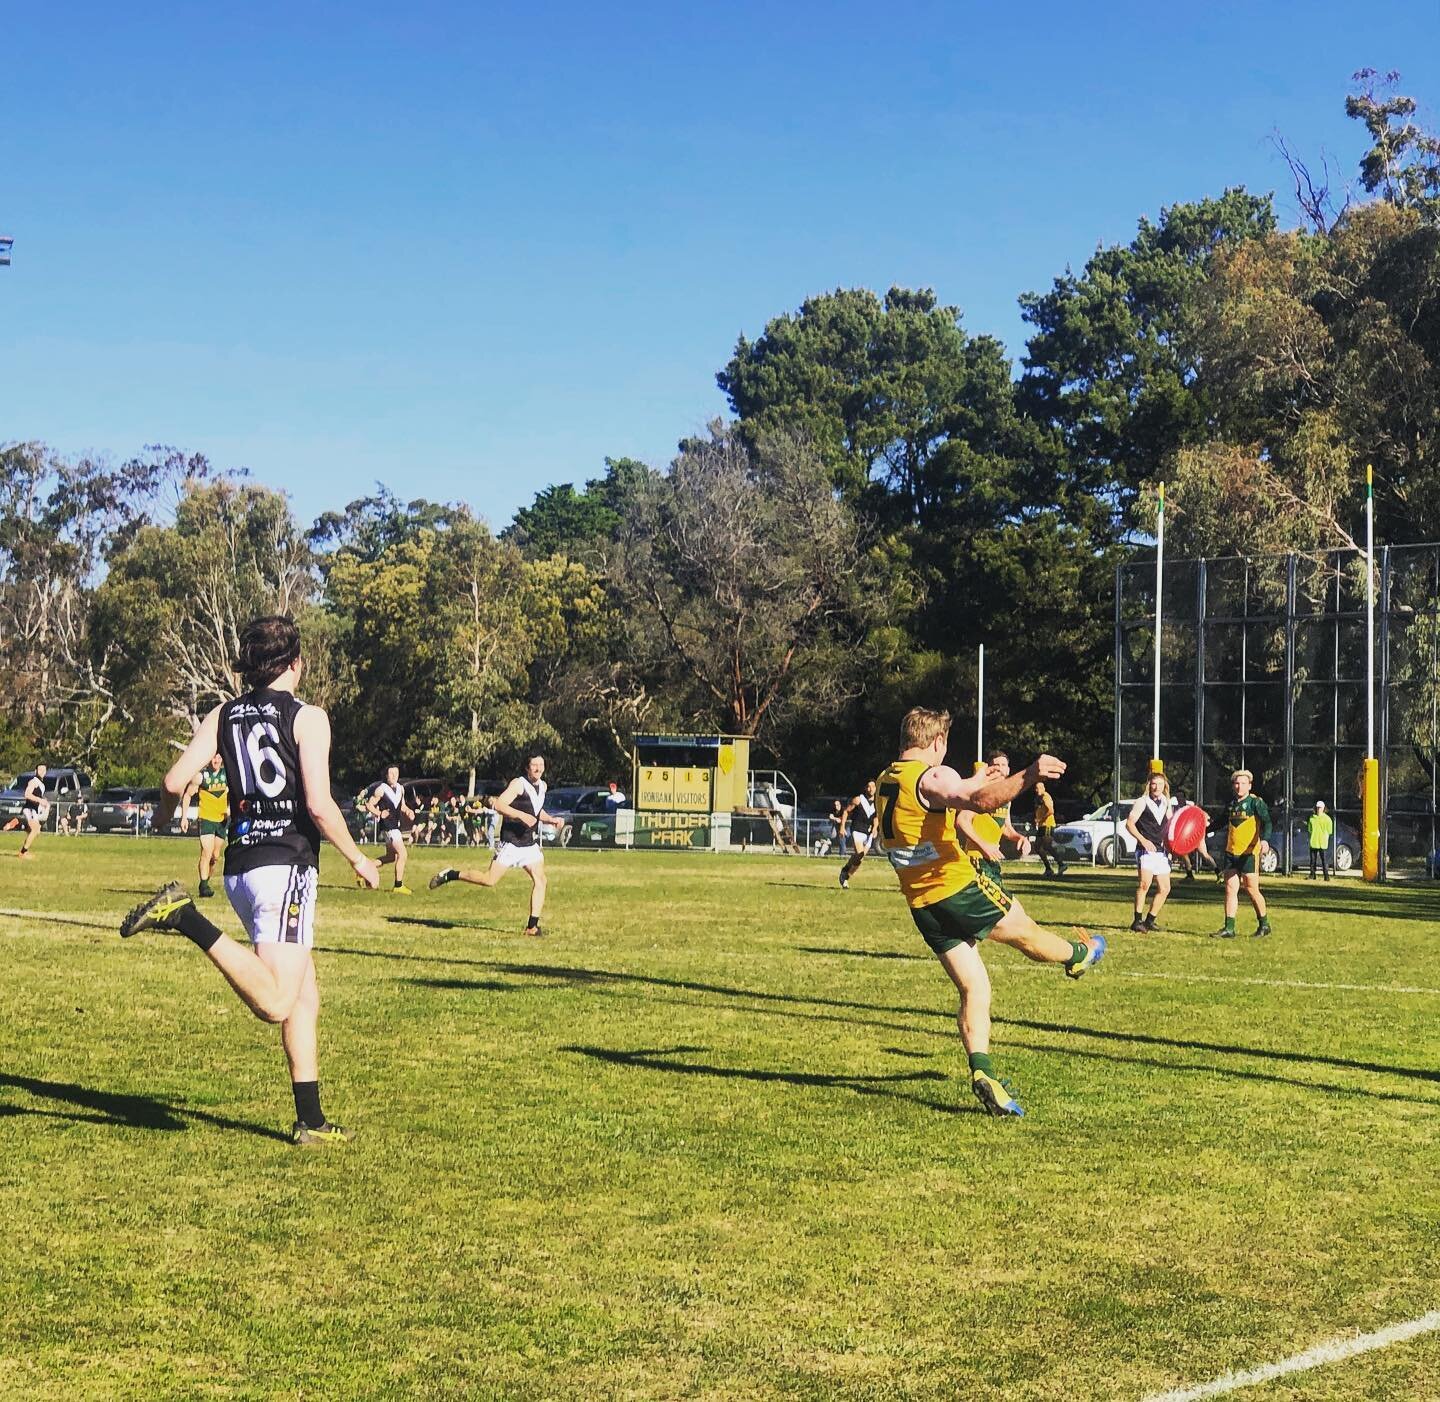 Beautiful day for footy today! ☀️ 
&bull;
Wins for 18&rsquo;s, B&rsquo;s &amp; A&rsquo;s, unfortunately a loss for 15.5&rsquo;s ⚡️